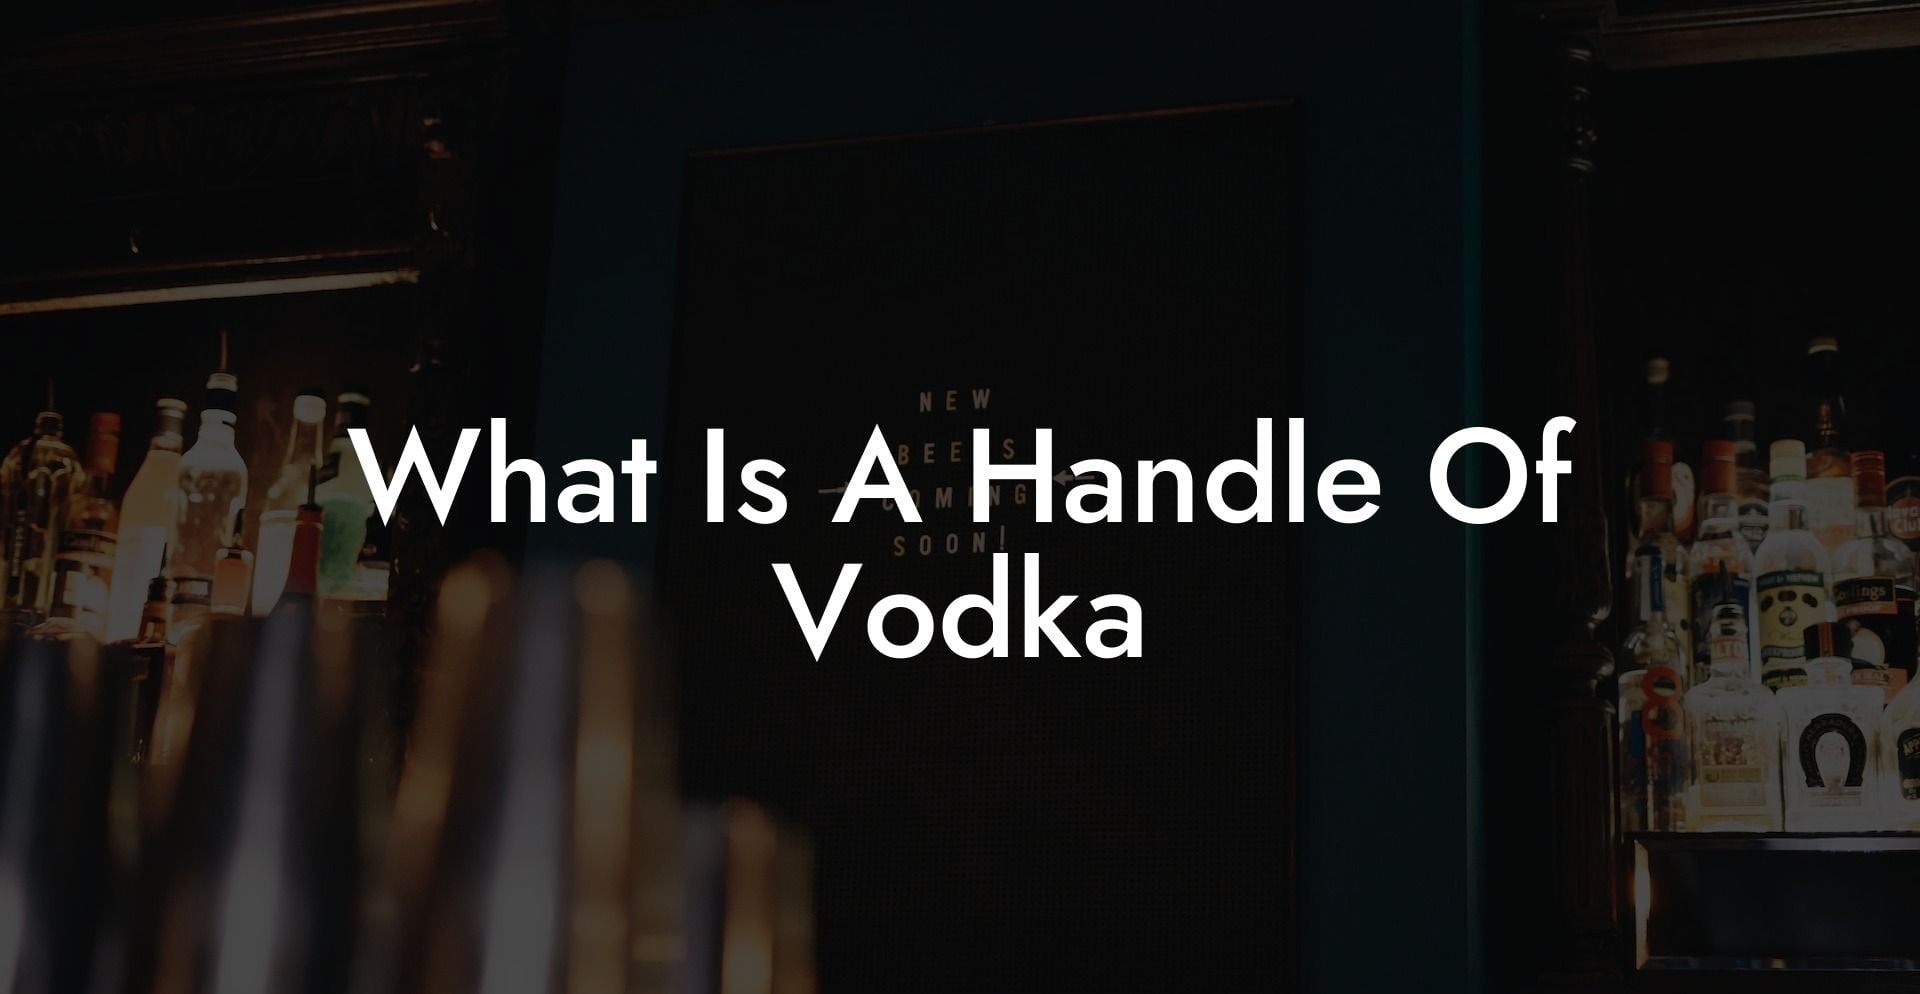 What Is A Handle Of Vodka